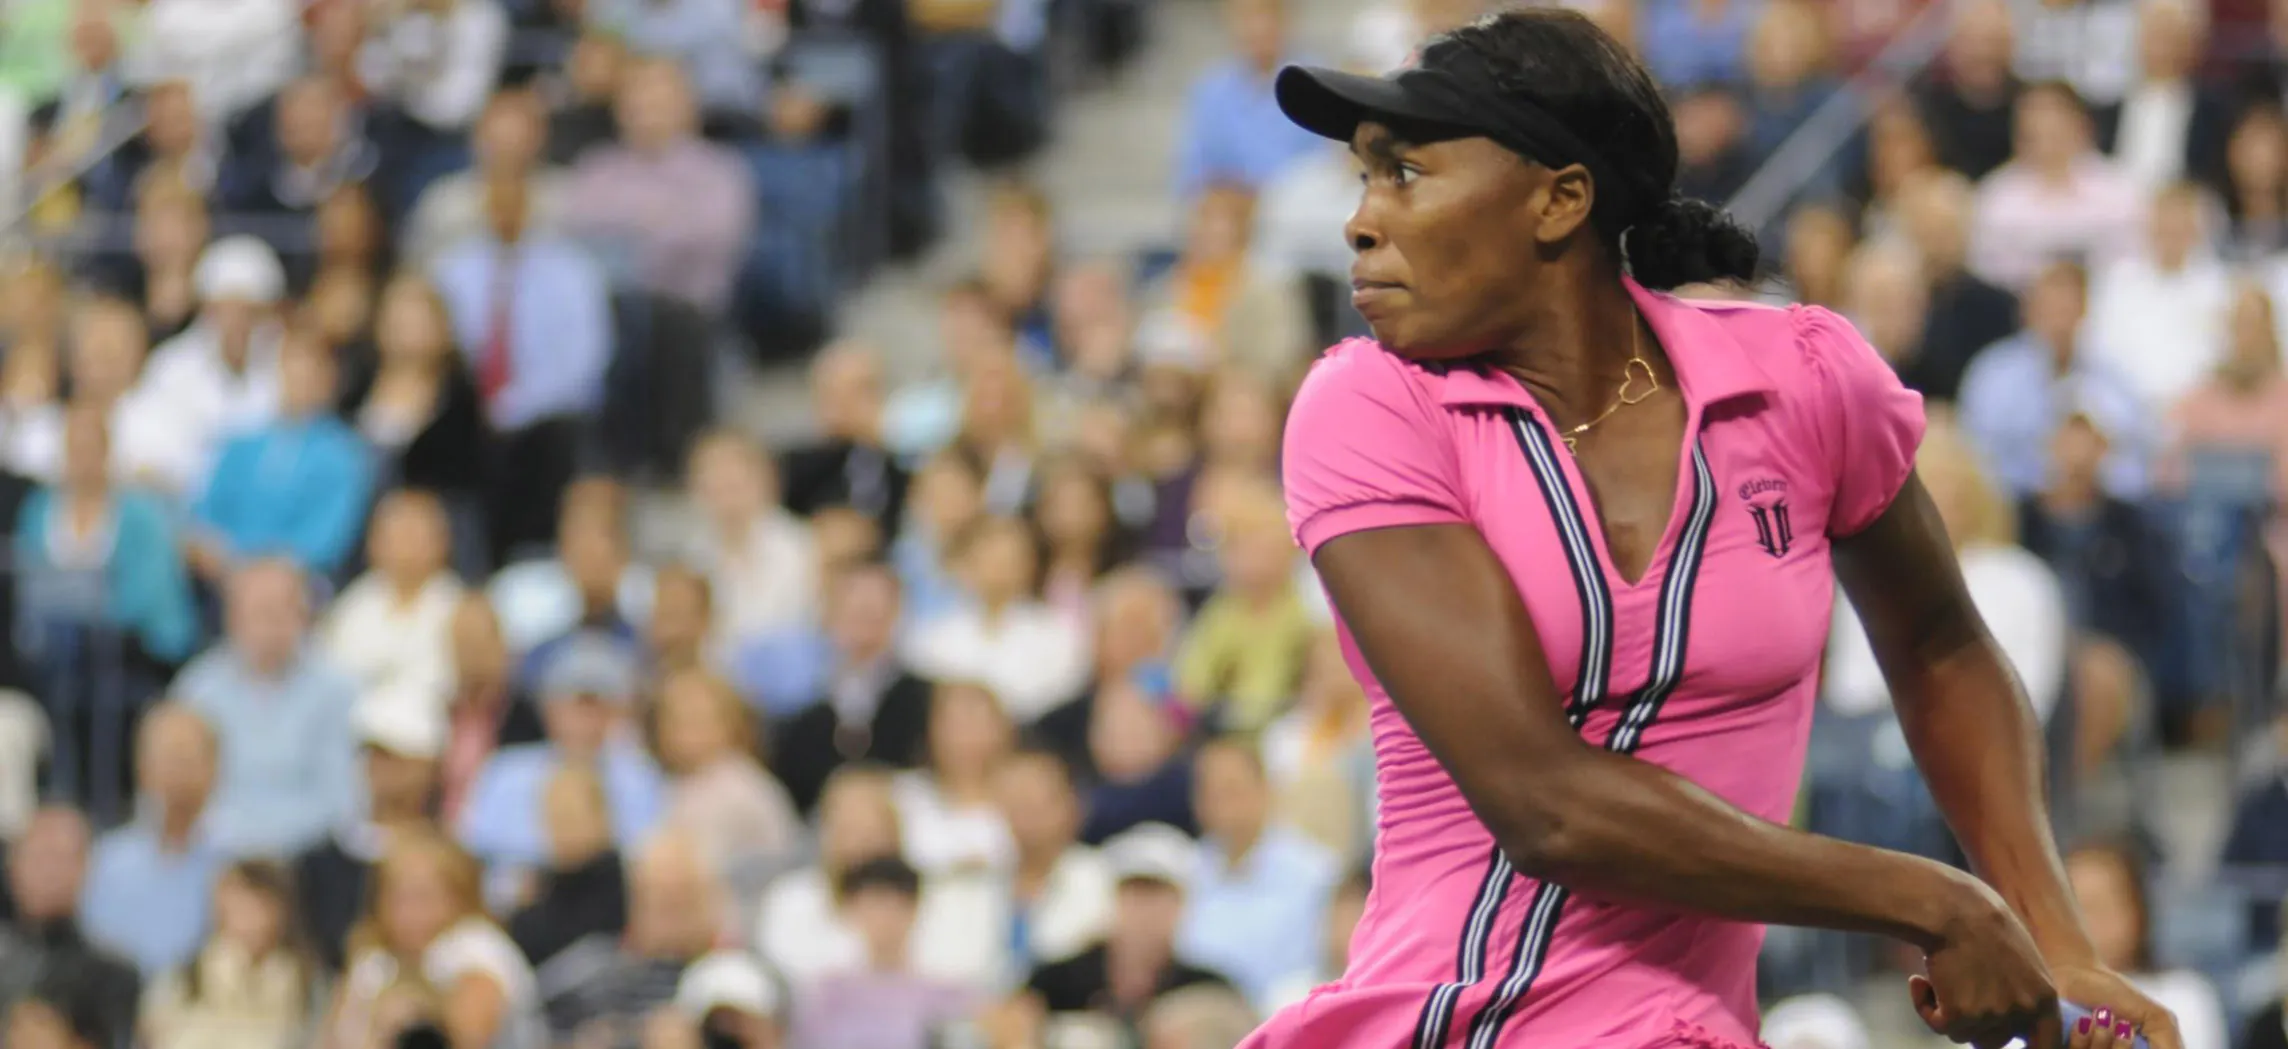 This is a photo of Venus Williams, the famous tennis player, executing a hard tennis swing.